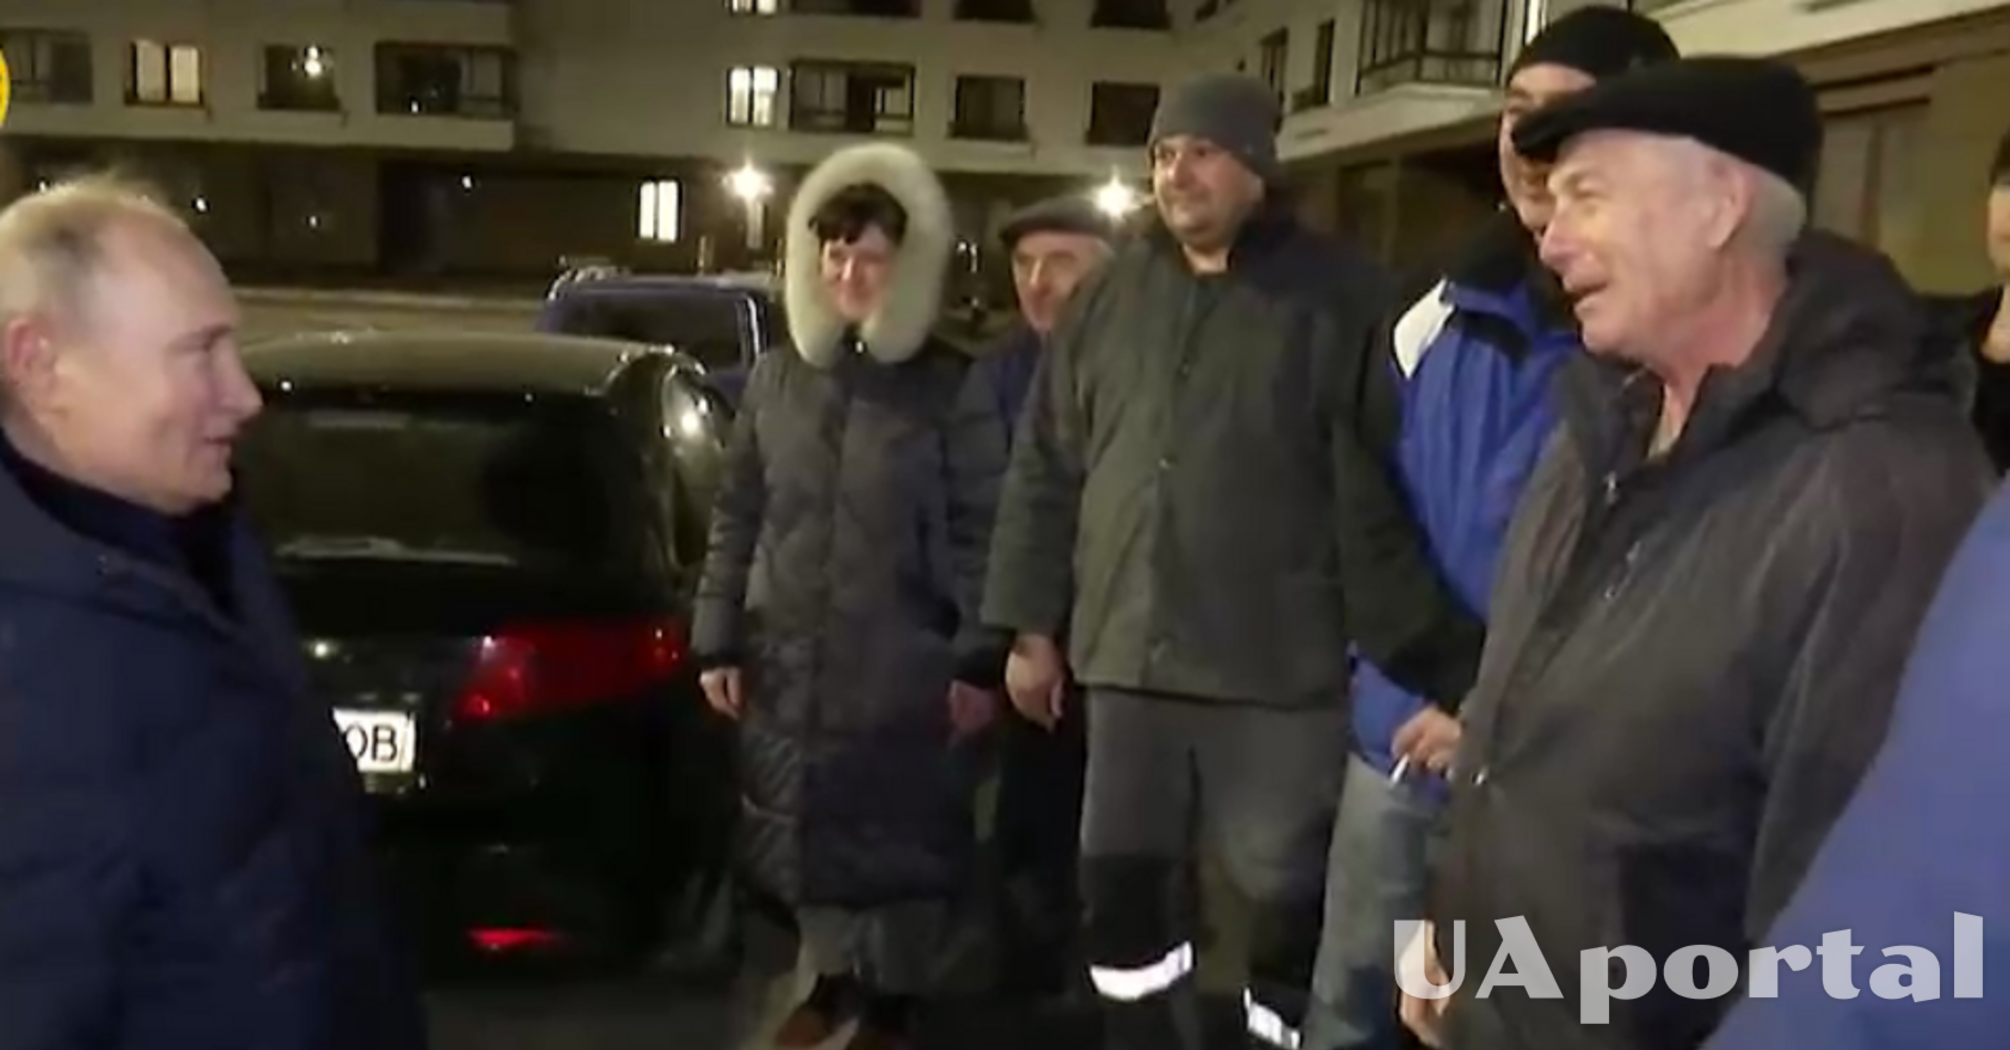 'Thank you for the visit': local residents staged a 'show' for Putin, who allegedly came to Mariupol (video)